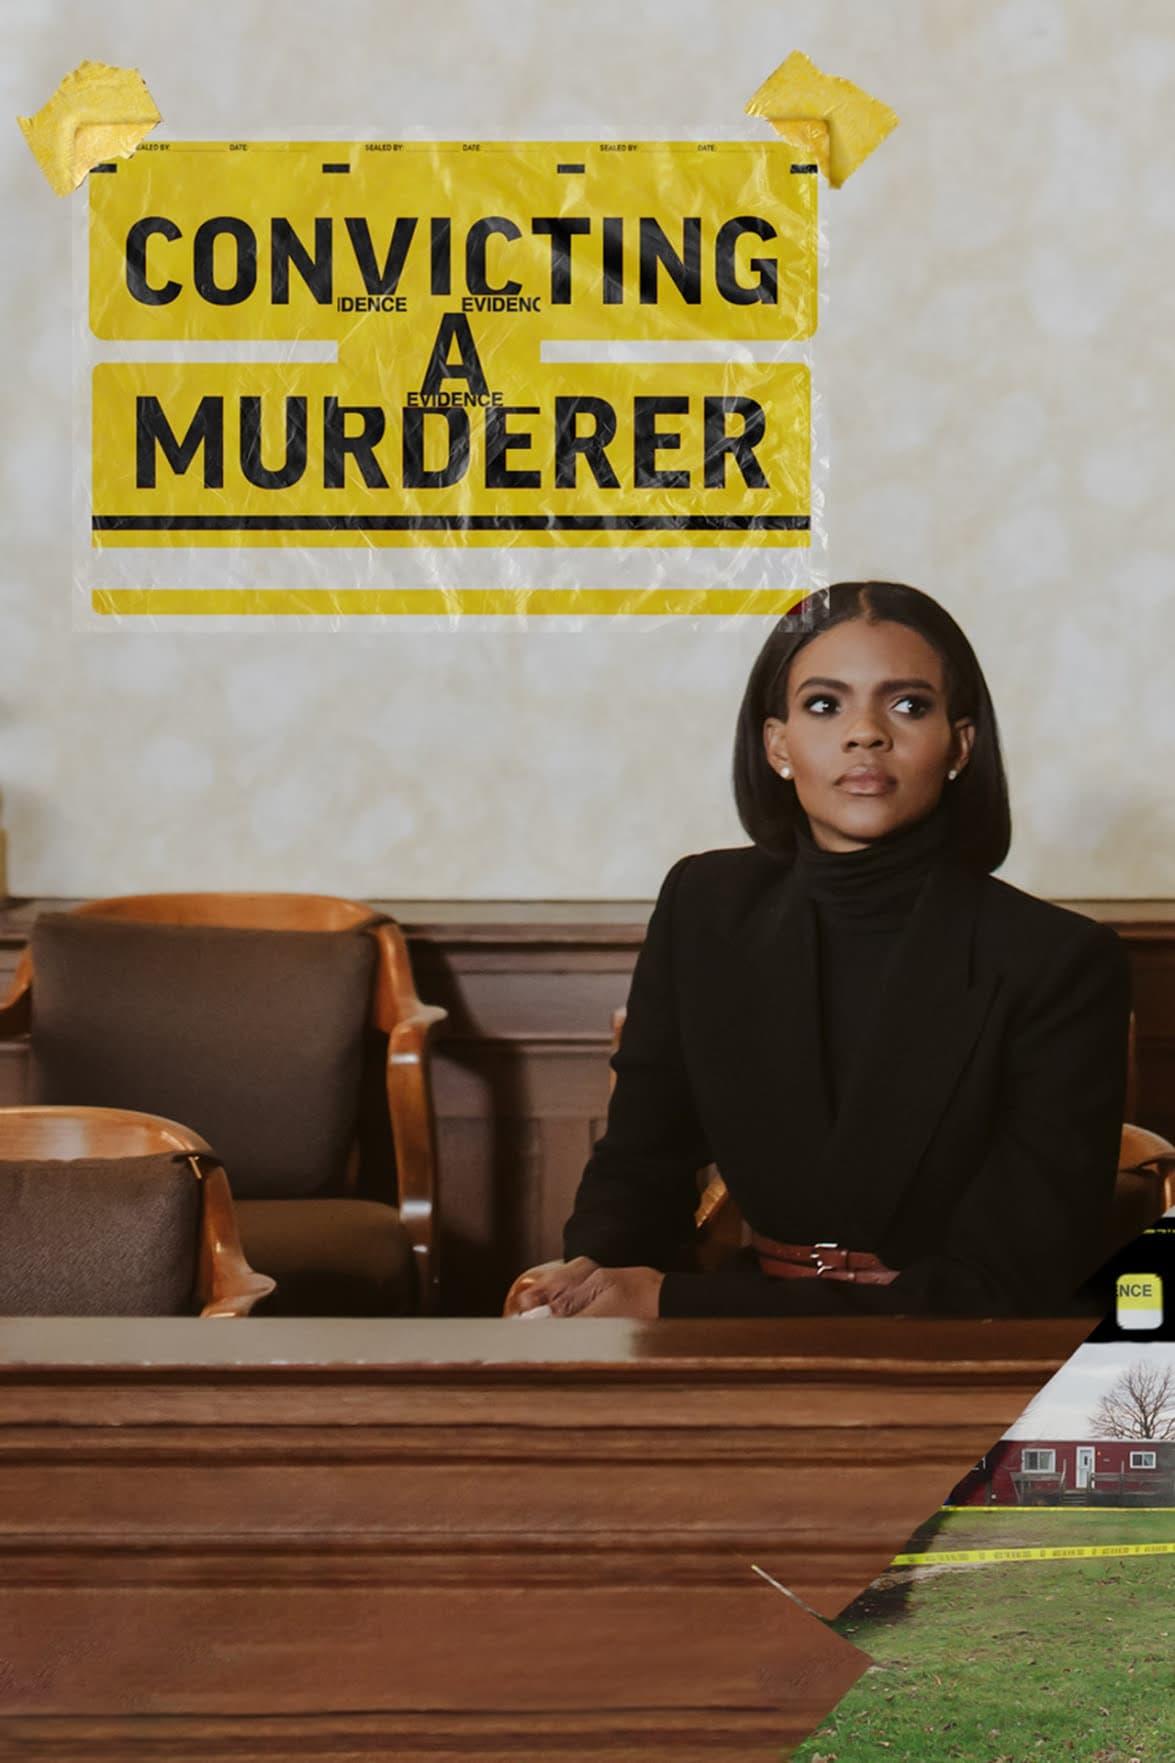 Convicting A Murderer poster